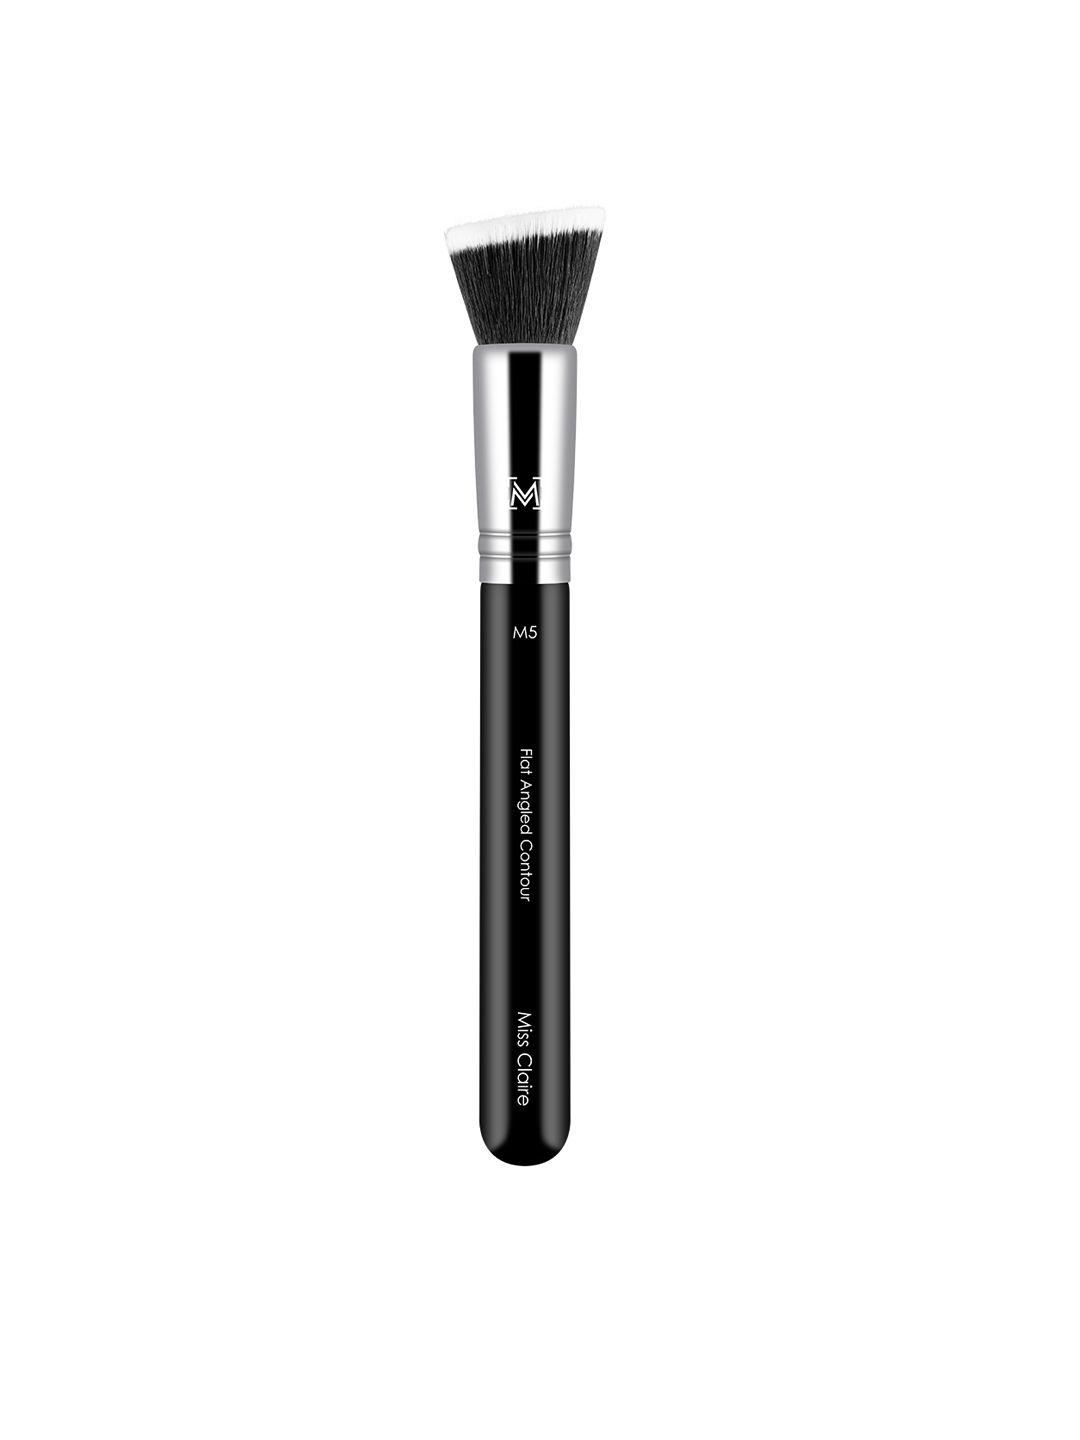 miss claire m5 - flat angled contour brush - silver-toned & black